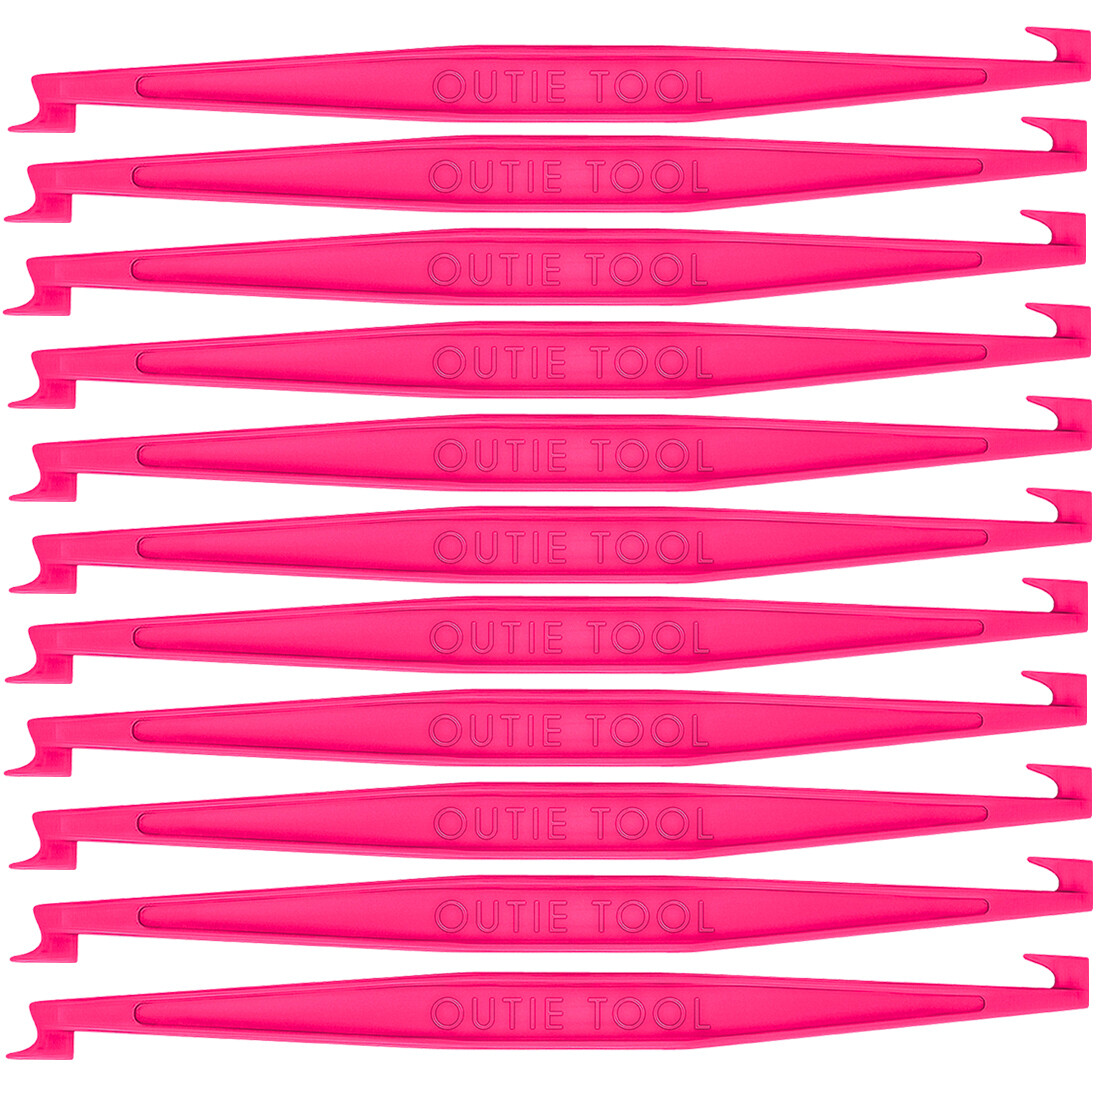 60 BULK UNPACKAGED OUTIE TOOLS - 60 HOT PINK